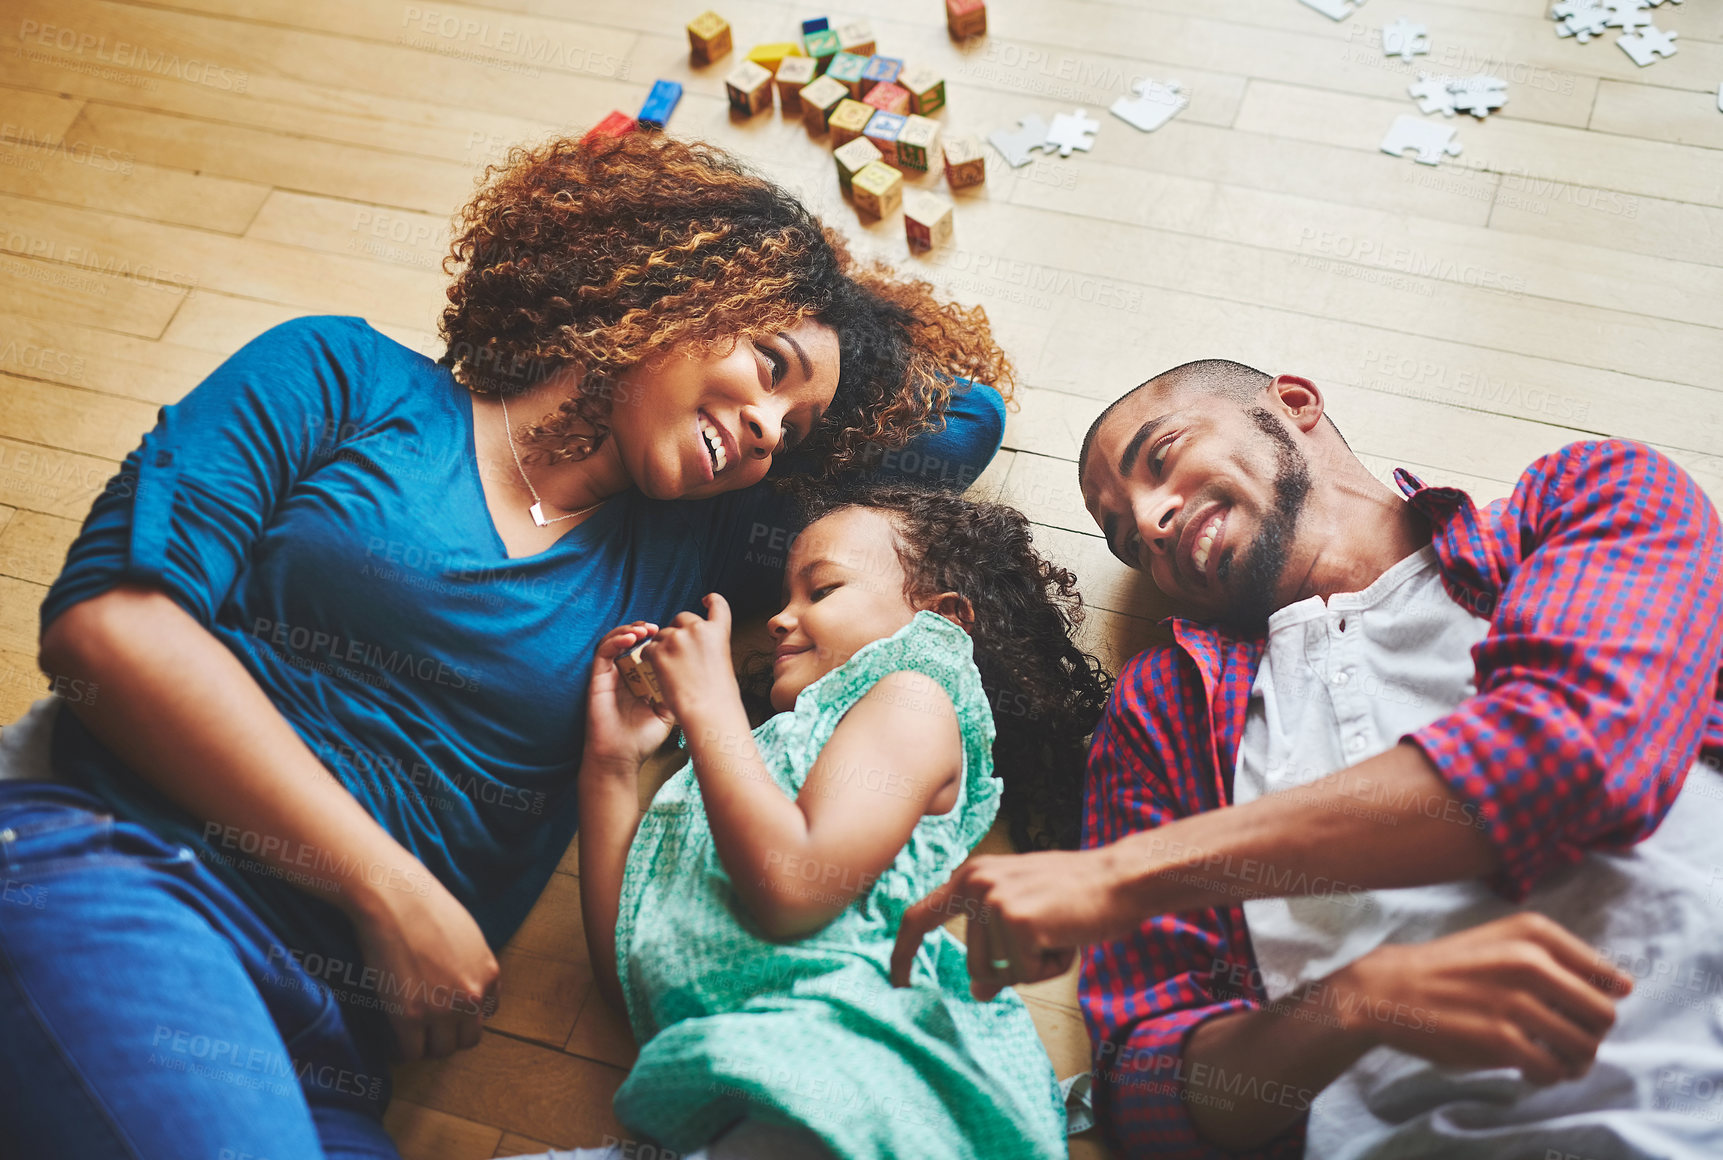 Buy stock photo Cropped shot of a family of three spending quality time together